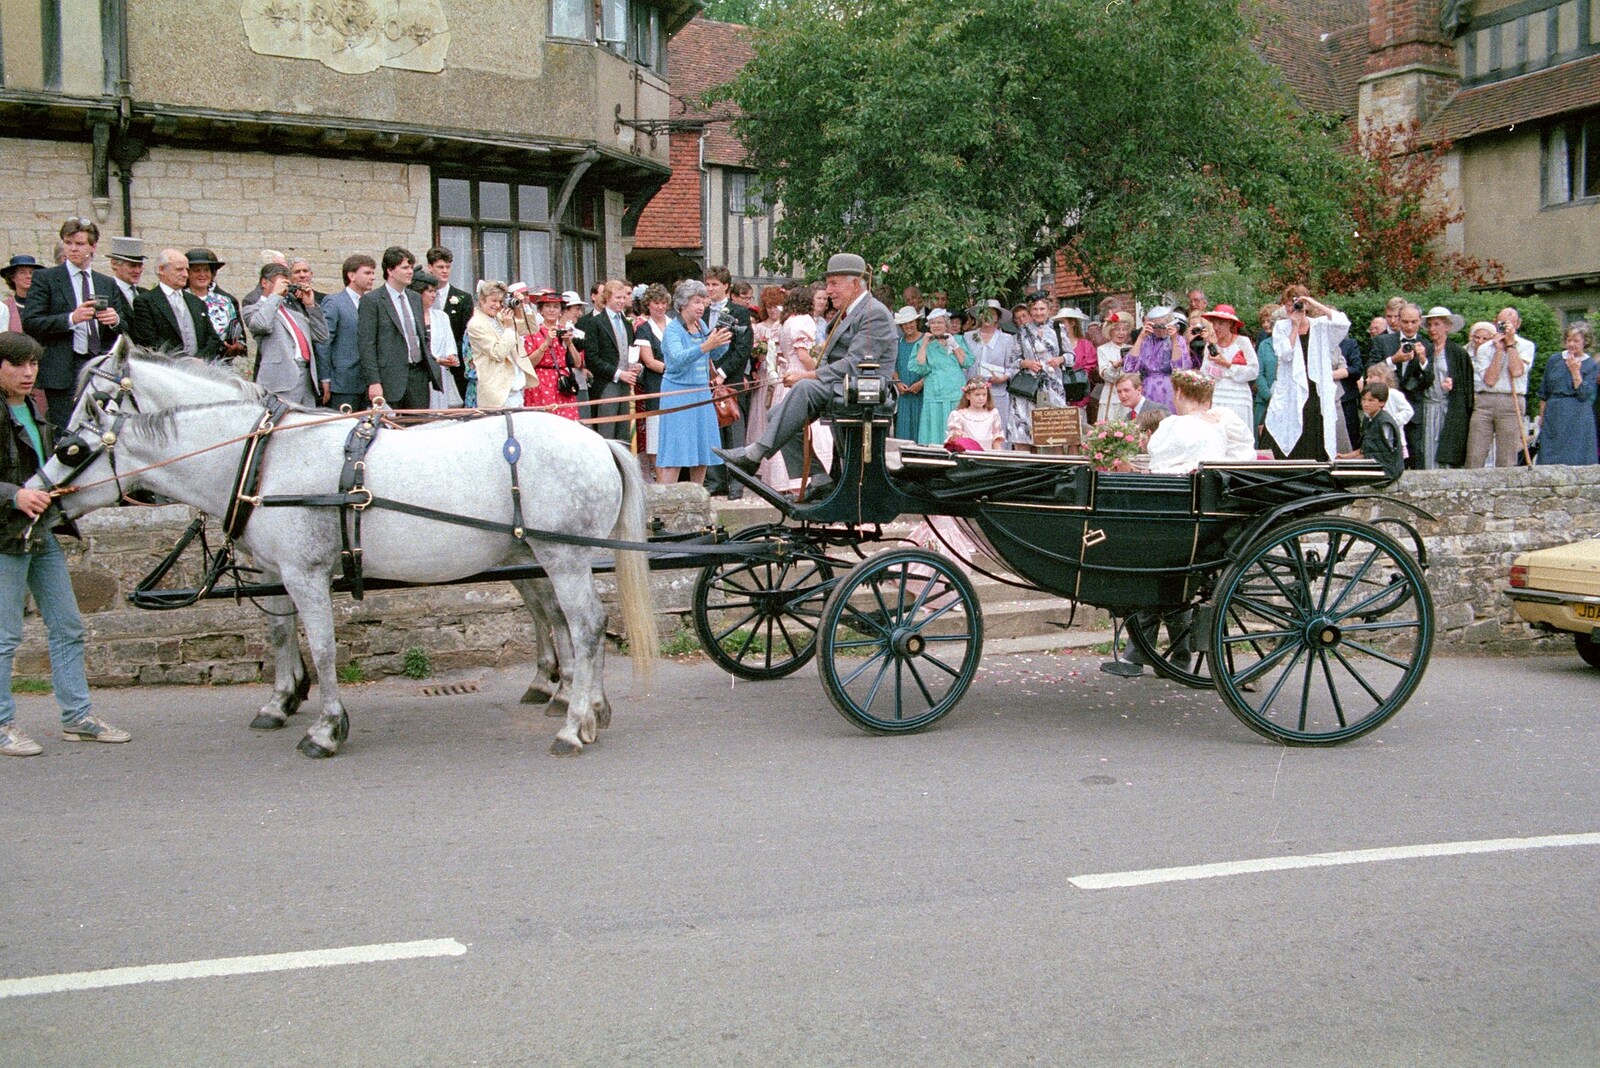 Horse and carriage at a Pevensey wedding from A Trip to Groombridge, Kent - 10th July 1986